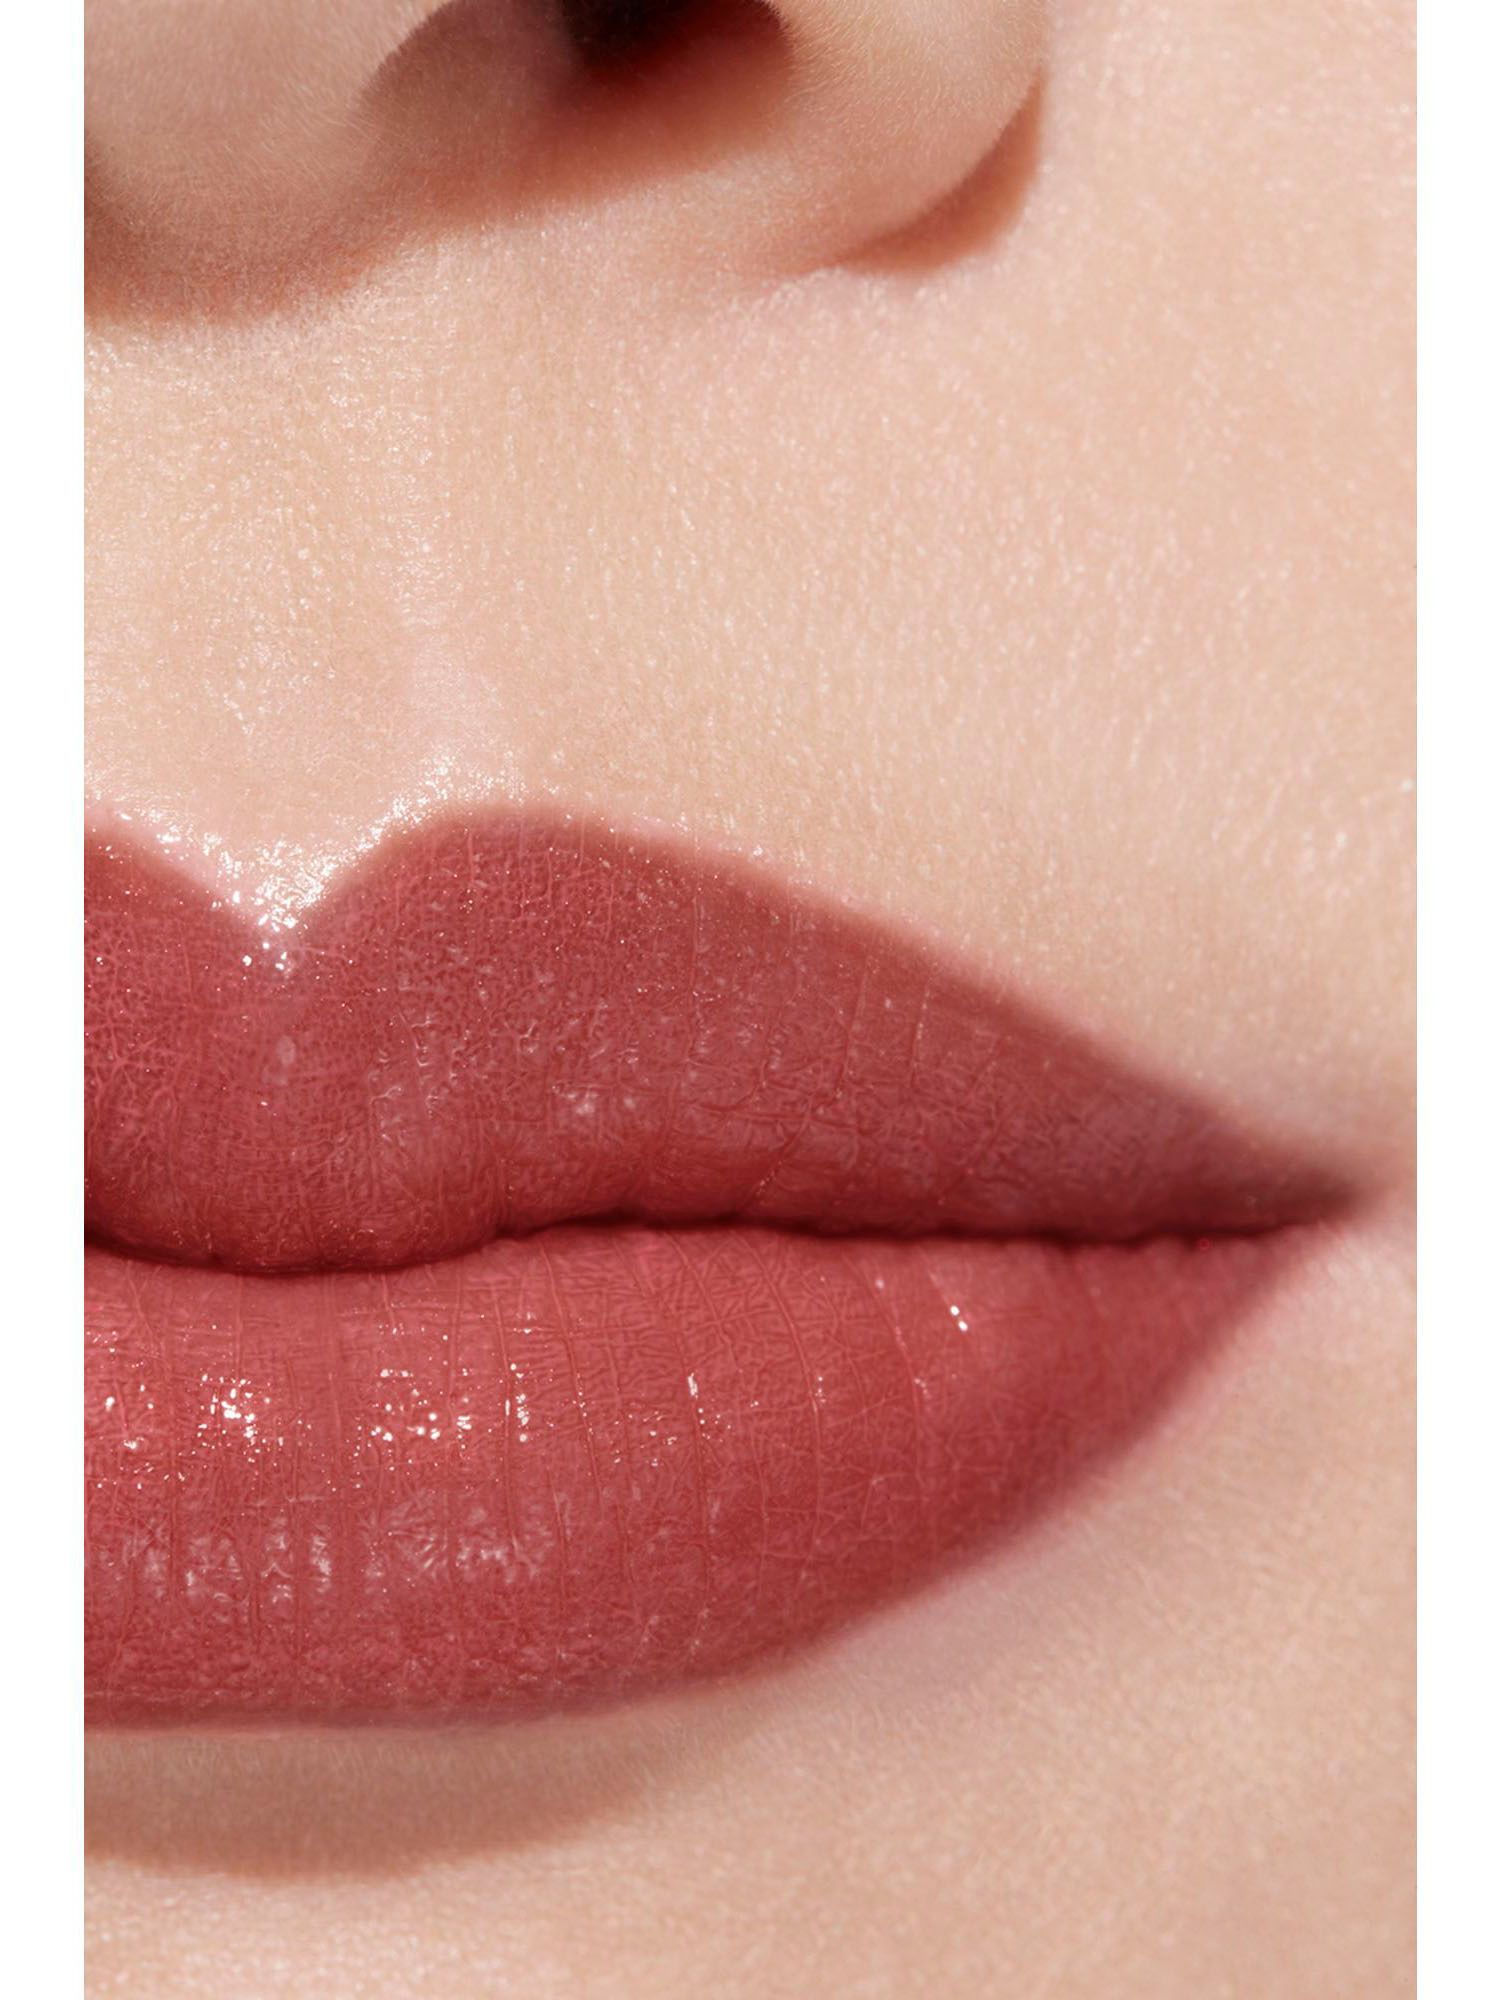 CHANEL Rouge Coco Baume, 930 Sweet Treat at John Lewis & Partners